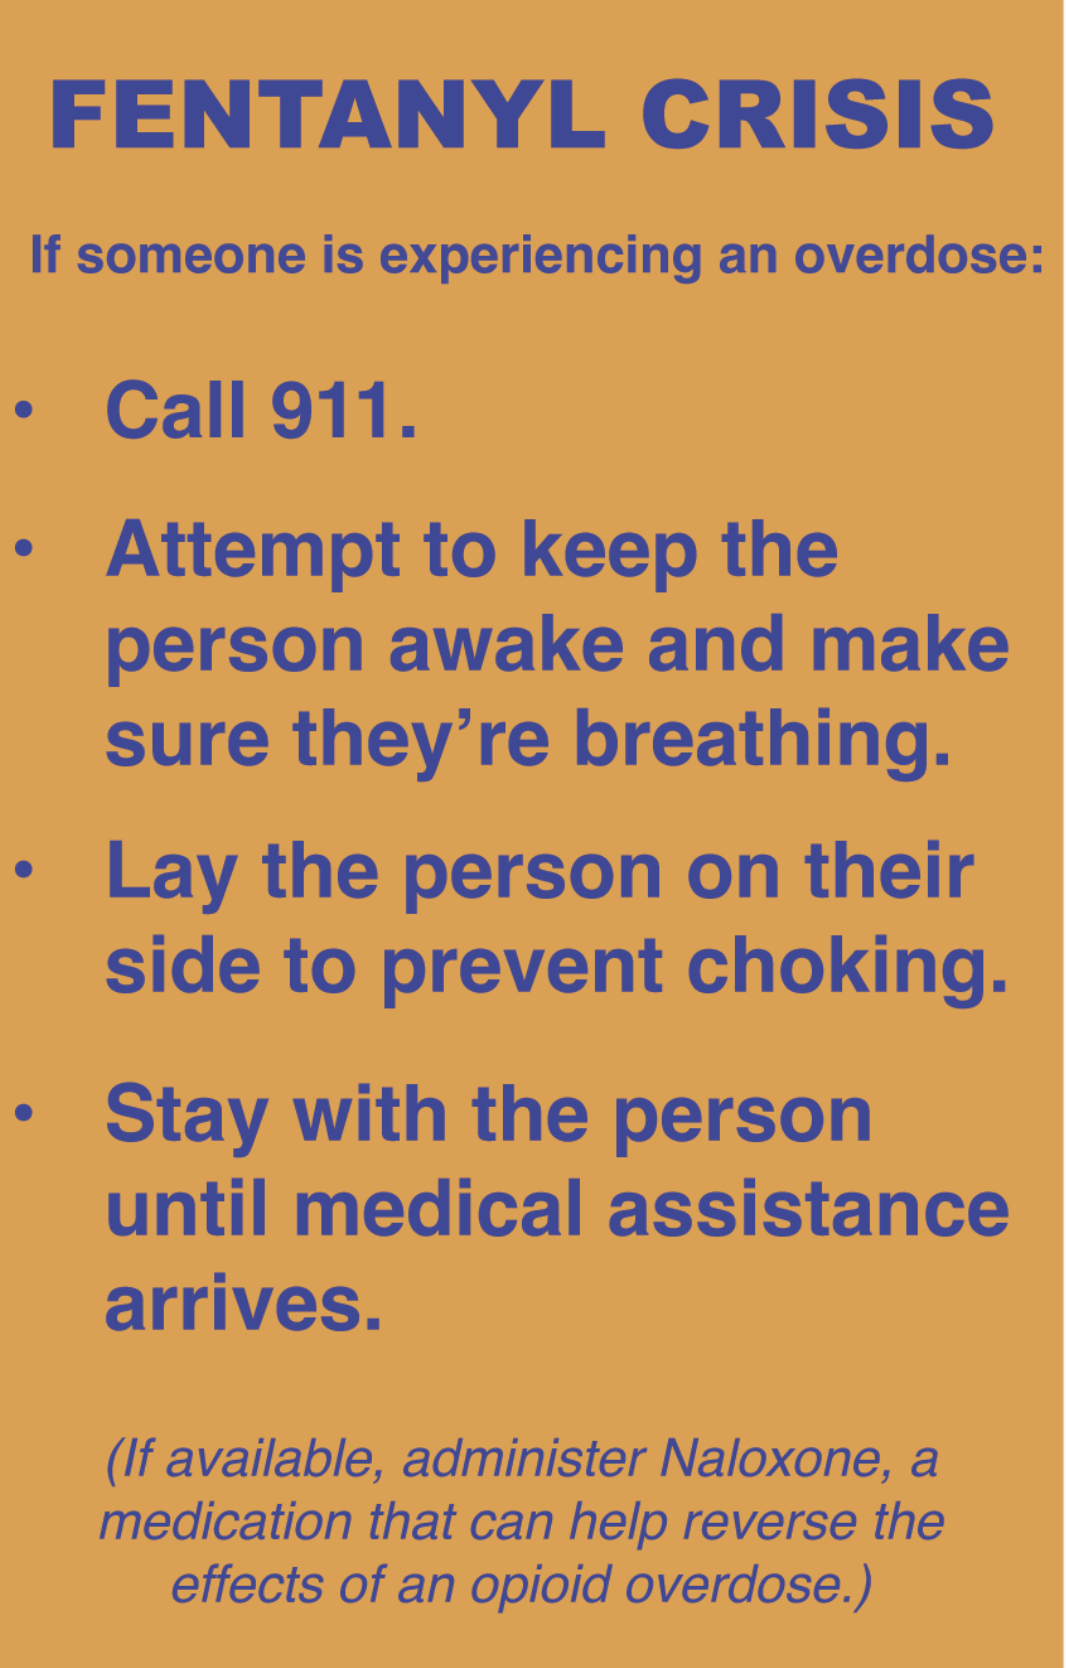 Prevent and Respond to Fentanyl Overdoses